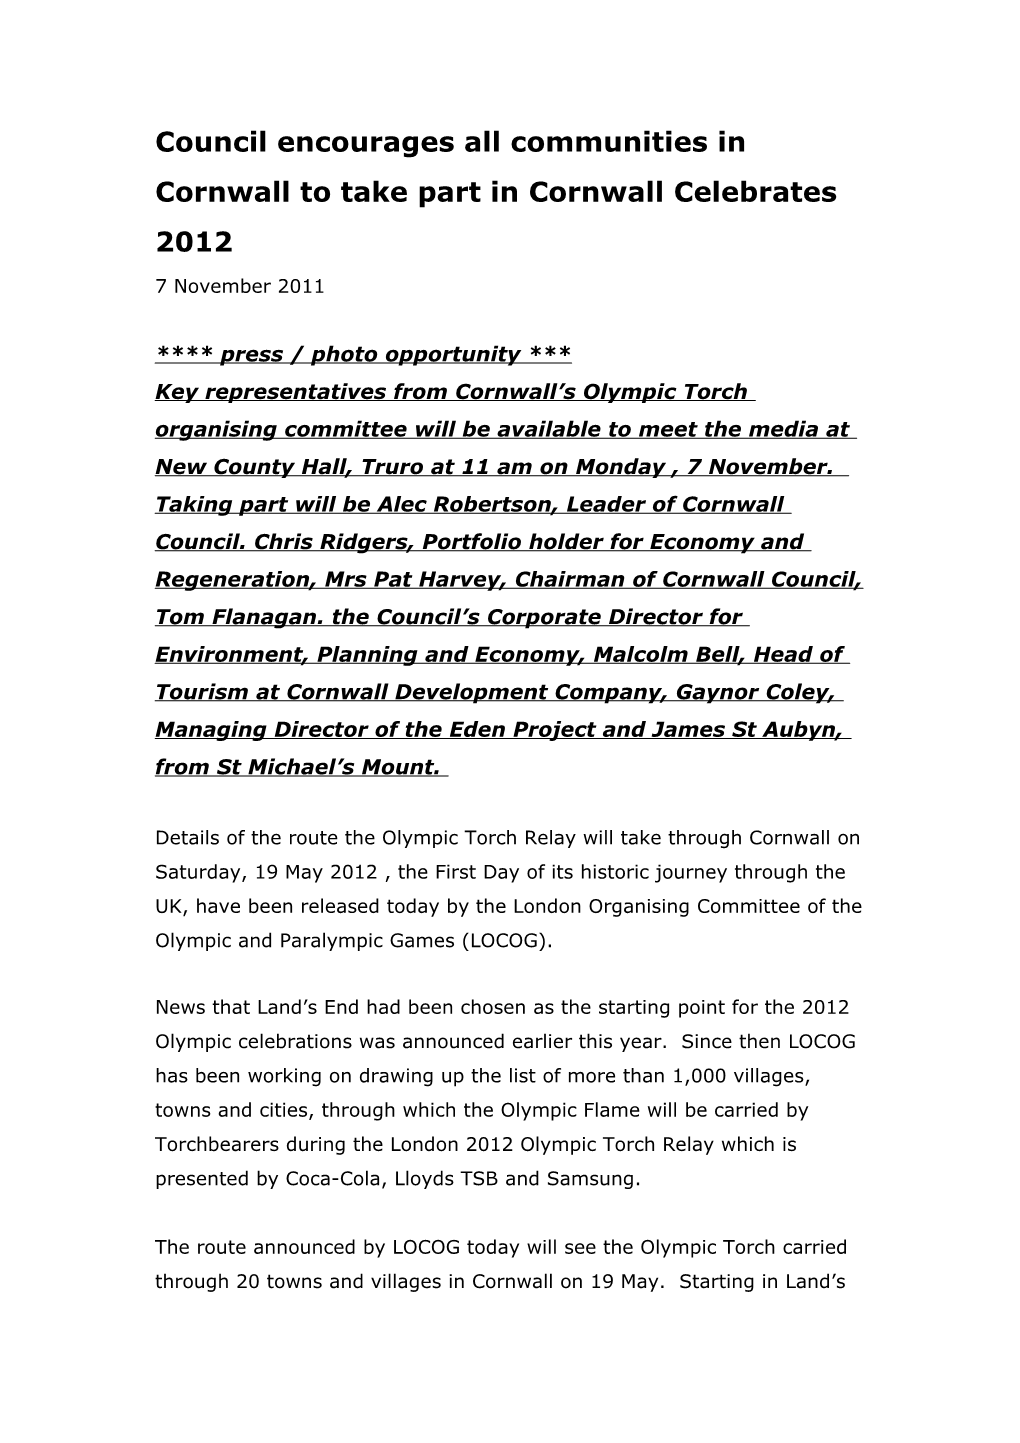 Details of the Route the Olympic Torch Relay Will Take Through Cornwall on Saturday, 19